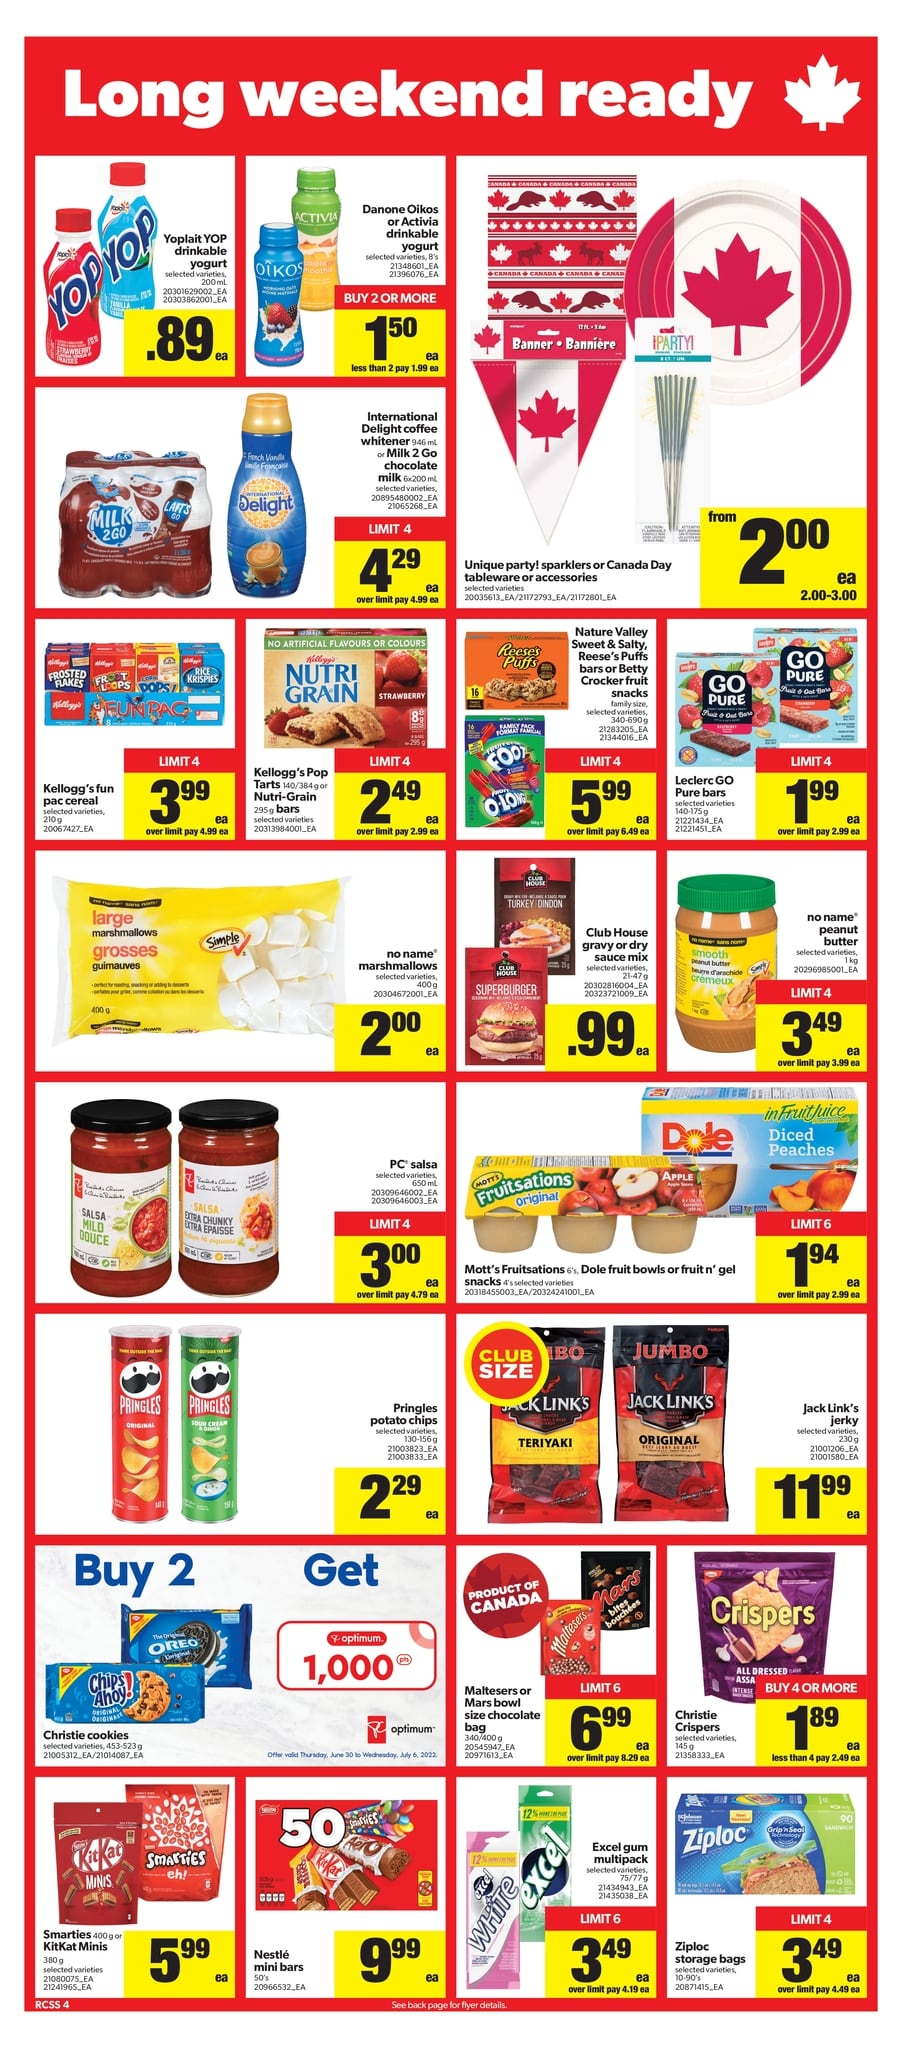 Real Canadian Superstore Ontario - Weekly Flyer Specials - Page 5